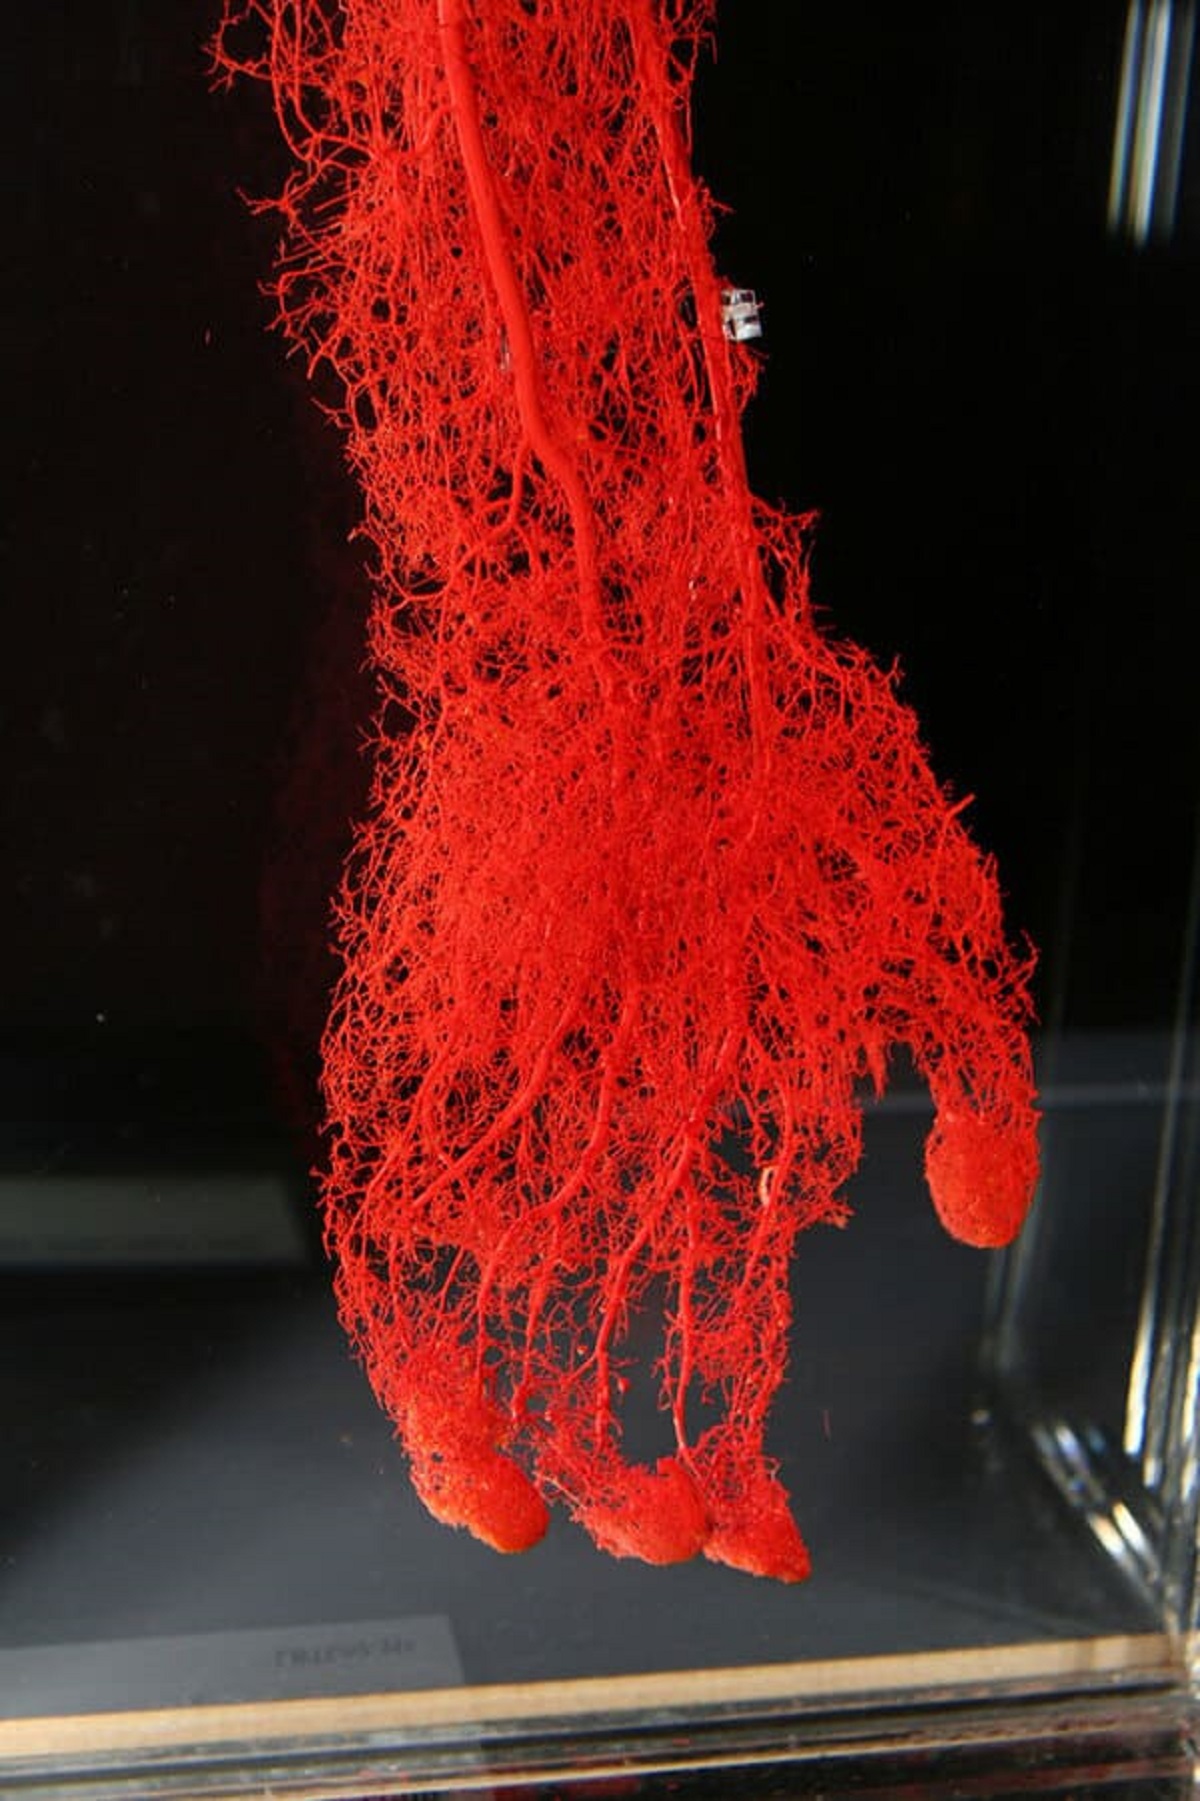 “The Blood Vessels Of A Hand”